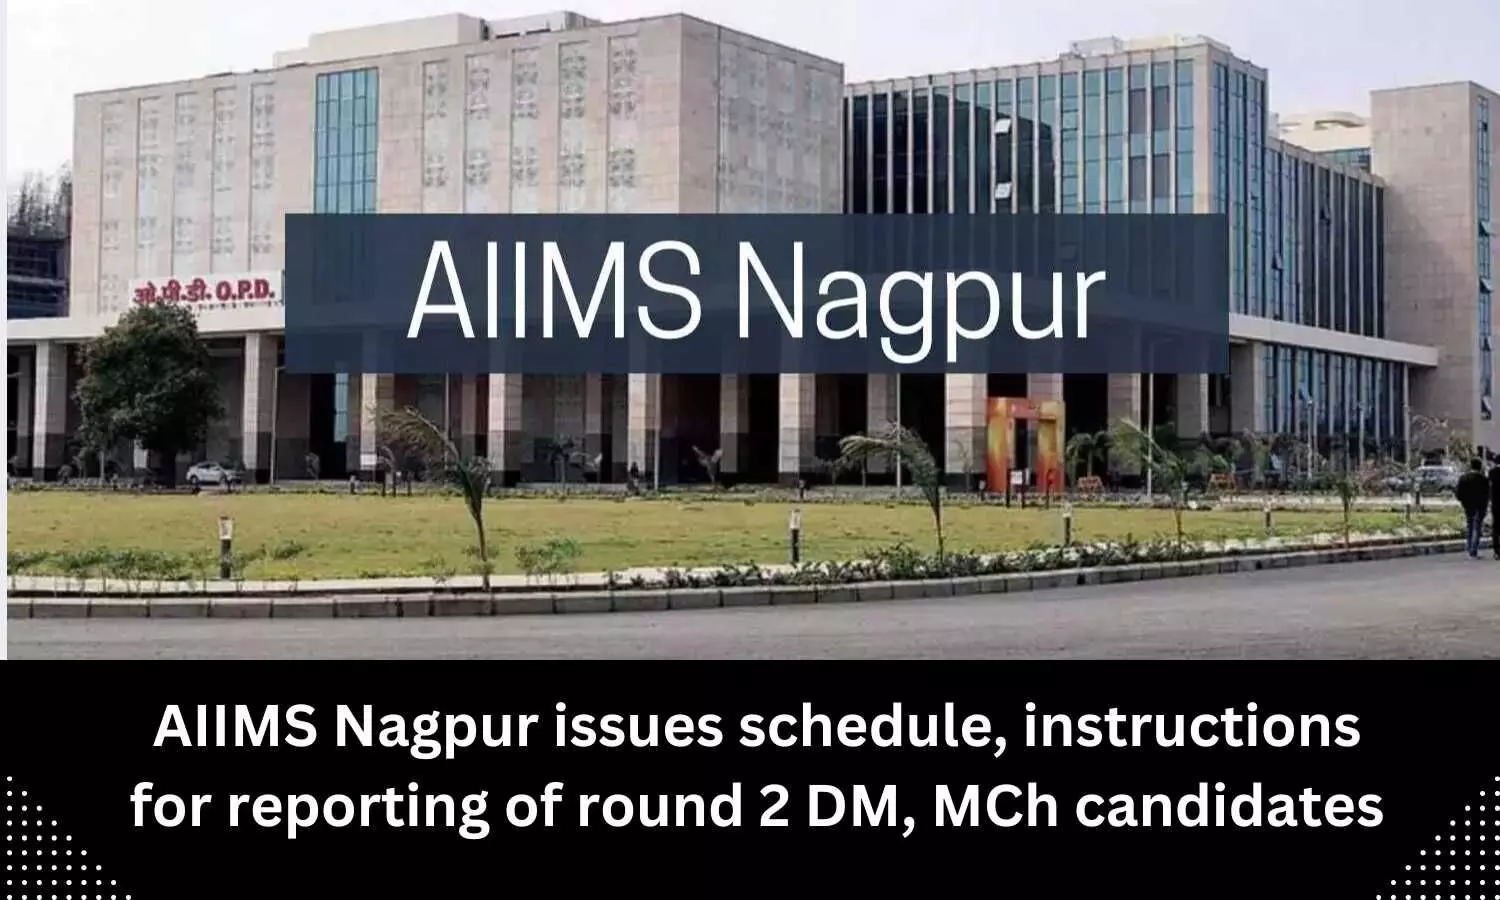 AIIMS Nagpur issues schedule, instructions for reporting of round 2 DM, MCh candidates